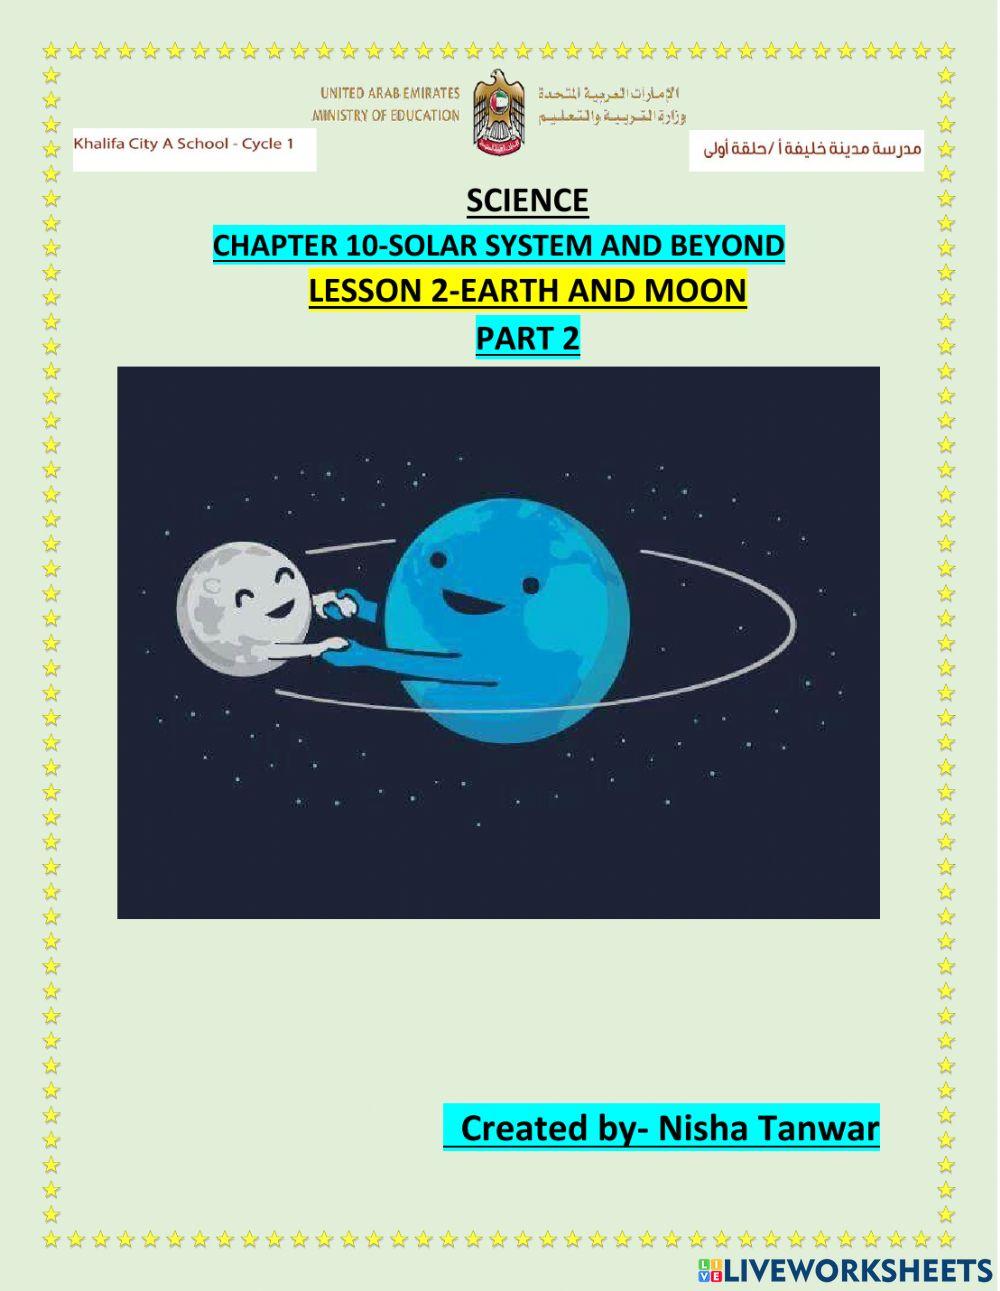 Chapter 10 lesson 2- EARTH AND MOON PART 2